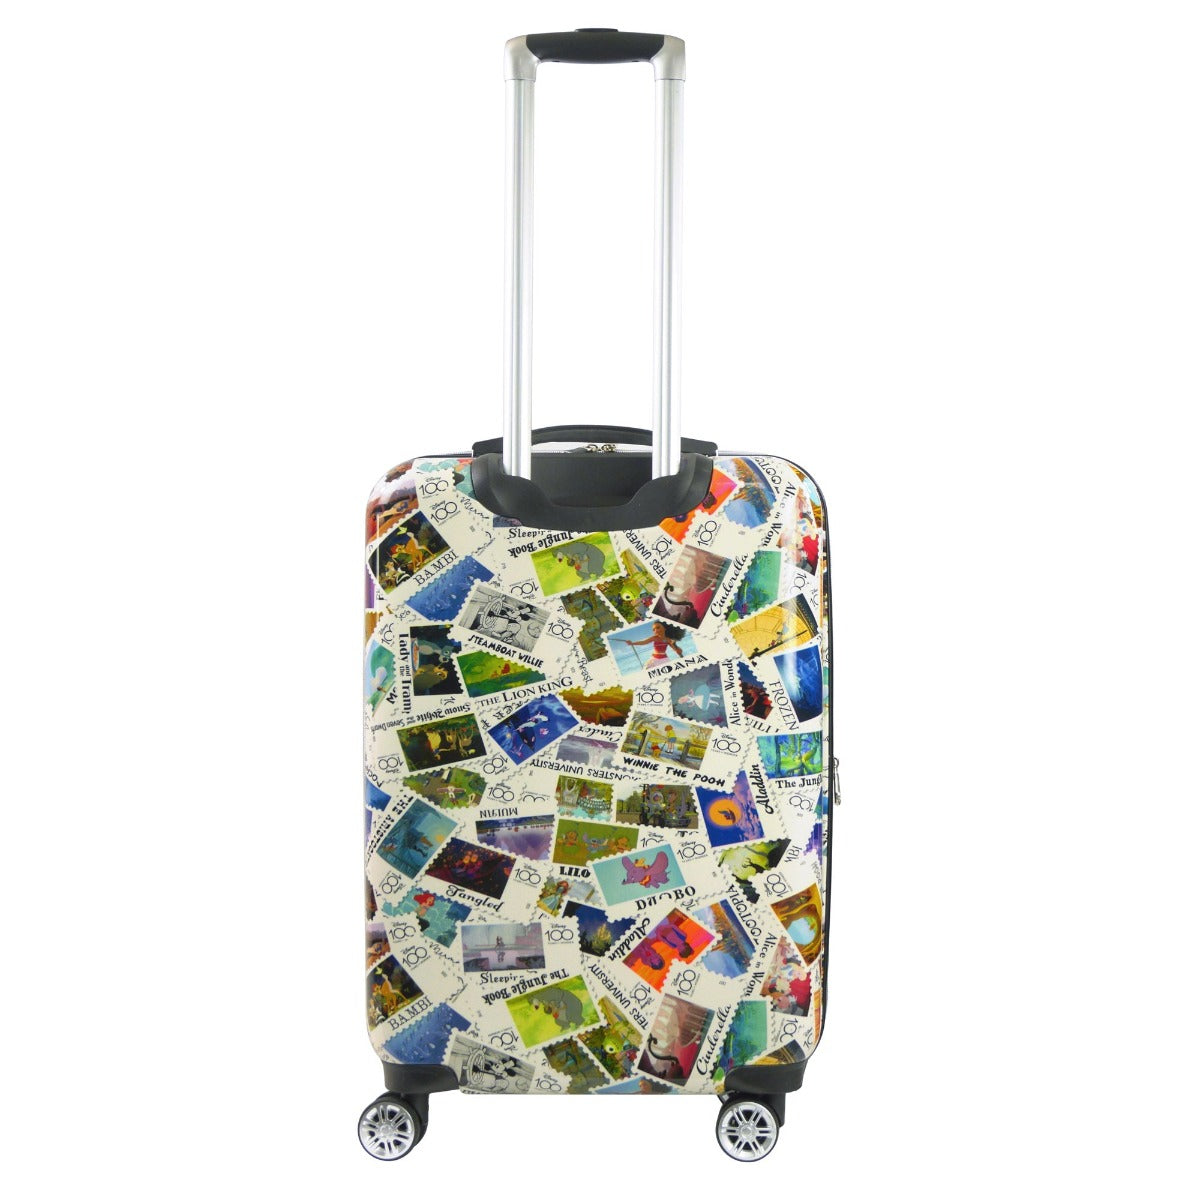 Ful Disney 100 Years Anniversary stamps hardsided spinner suitcase 26-inch limited edition check-in spinner suitcase 